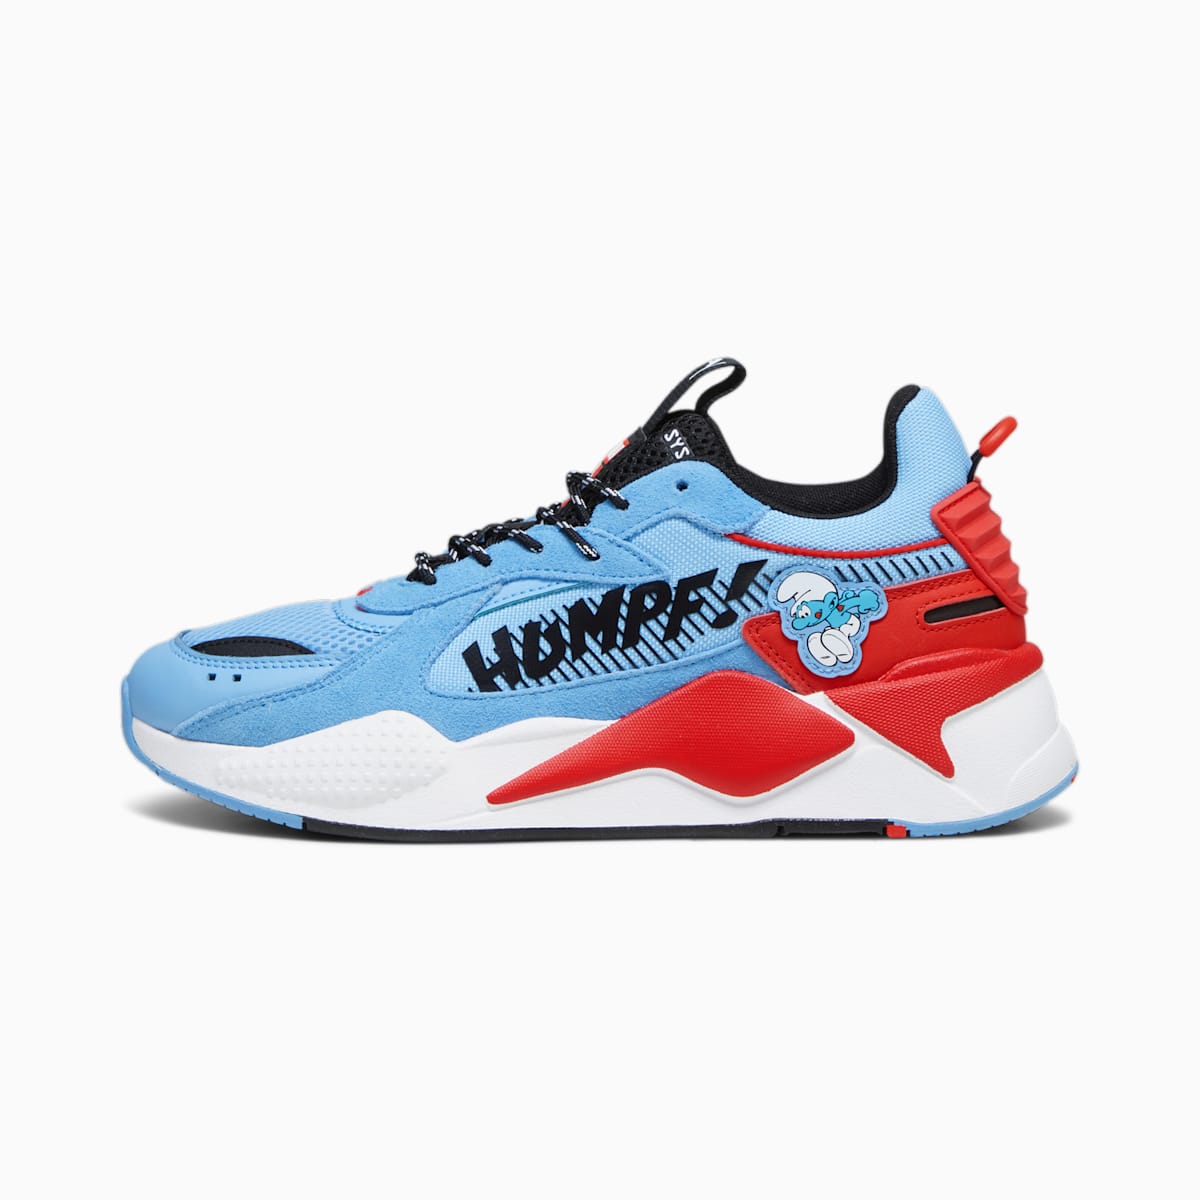 PUMA x THE SMURFS RS-X Sneakers